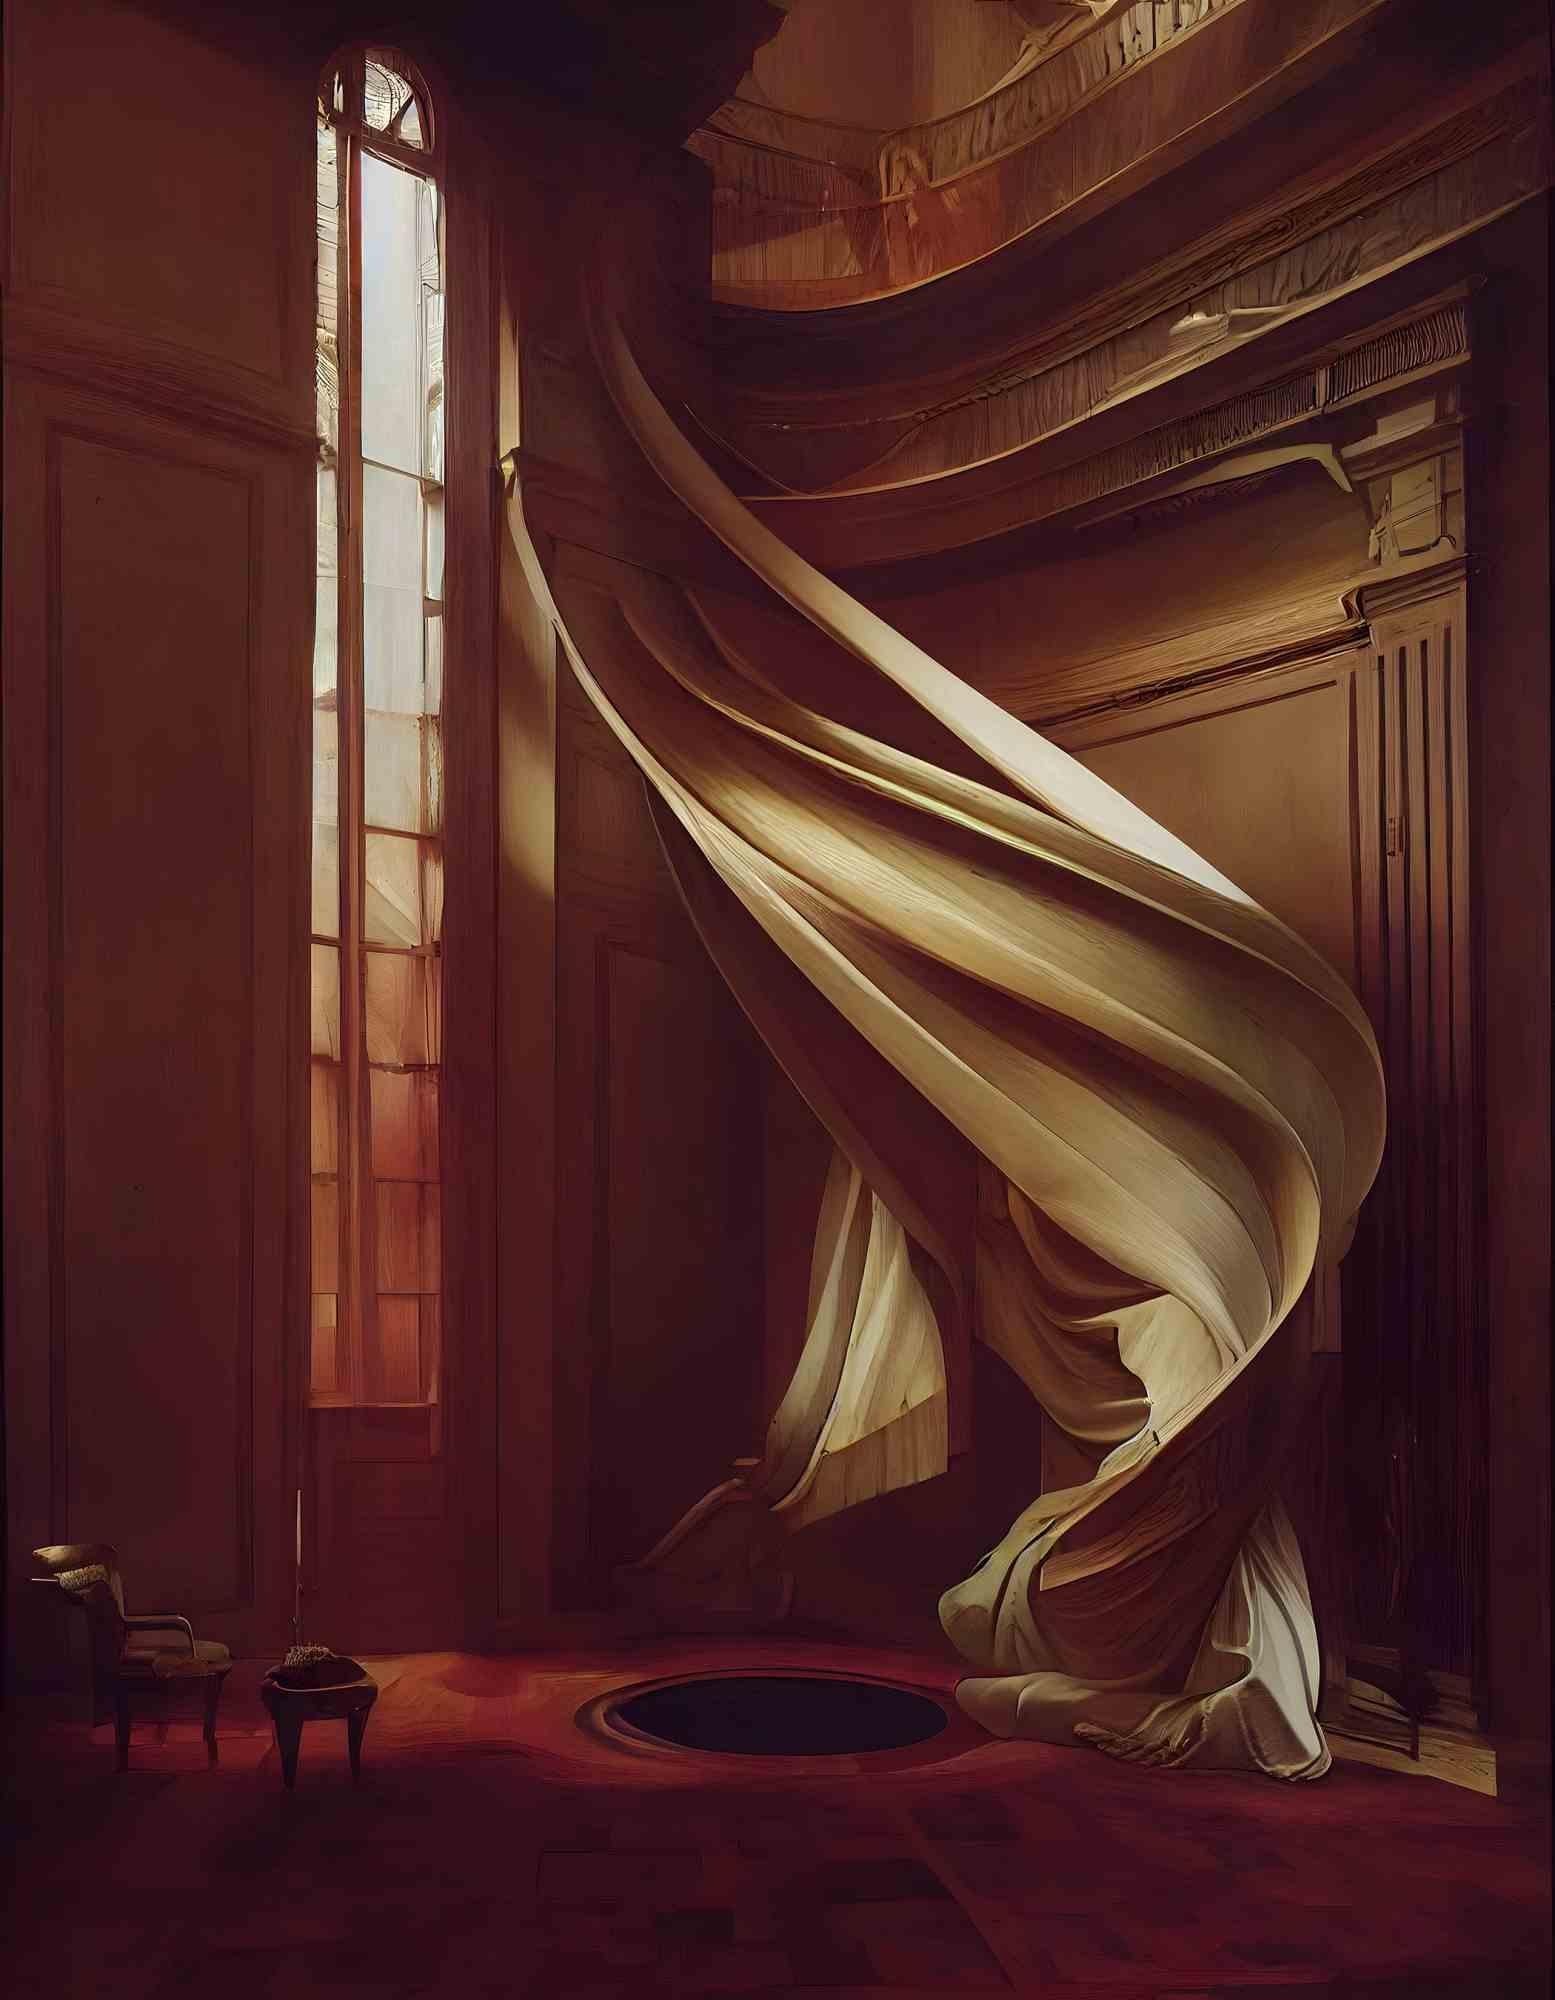 Ethereal beauty manifests itself in Silk serenade transformative work, where the human figure becomes a canvas for architectural wonderment, gracefully veiled in the luxurious embrace of delicate silk. The contours of romantic architecture and human